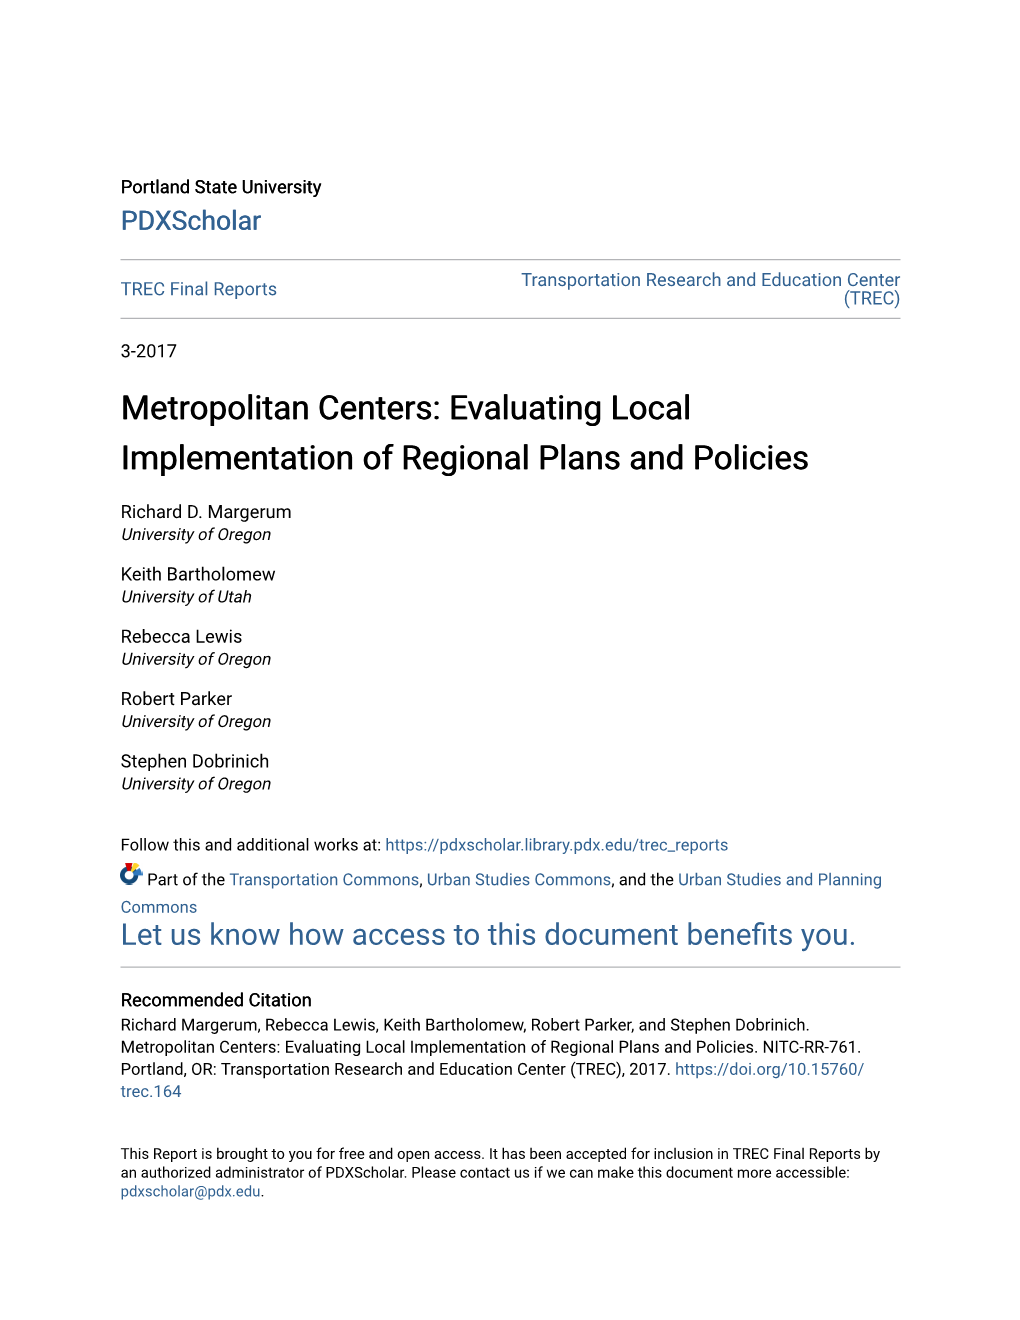 Metropolitan Centers: Evaluating Local Implementation of Regional Plans and Policies